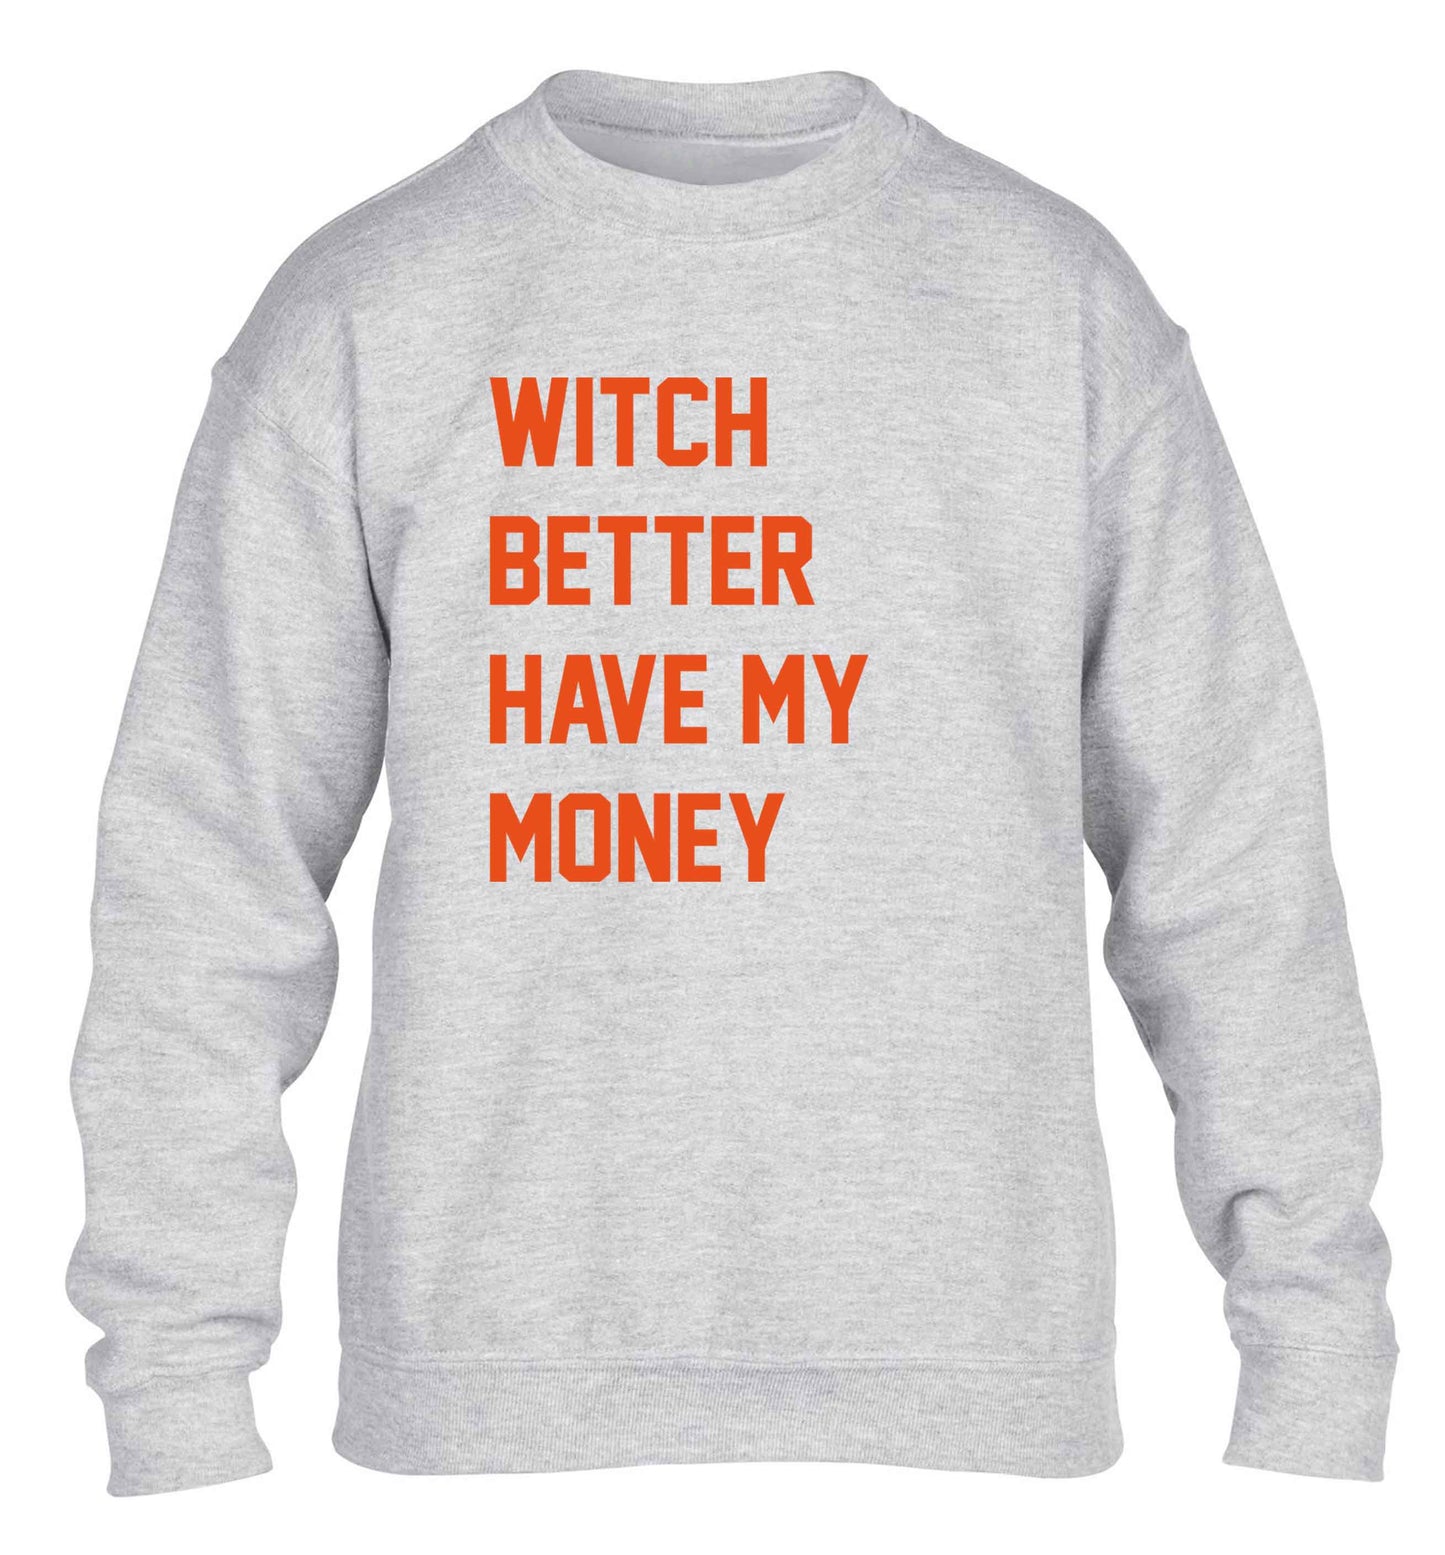 Witch better have my money children's grey sweater 12-13 Years